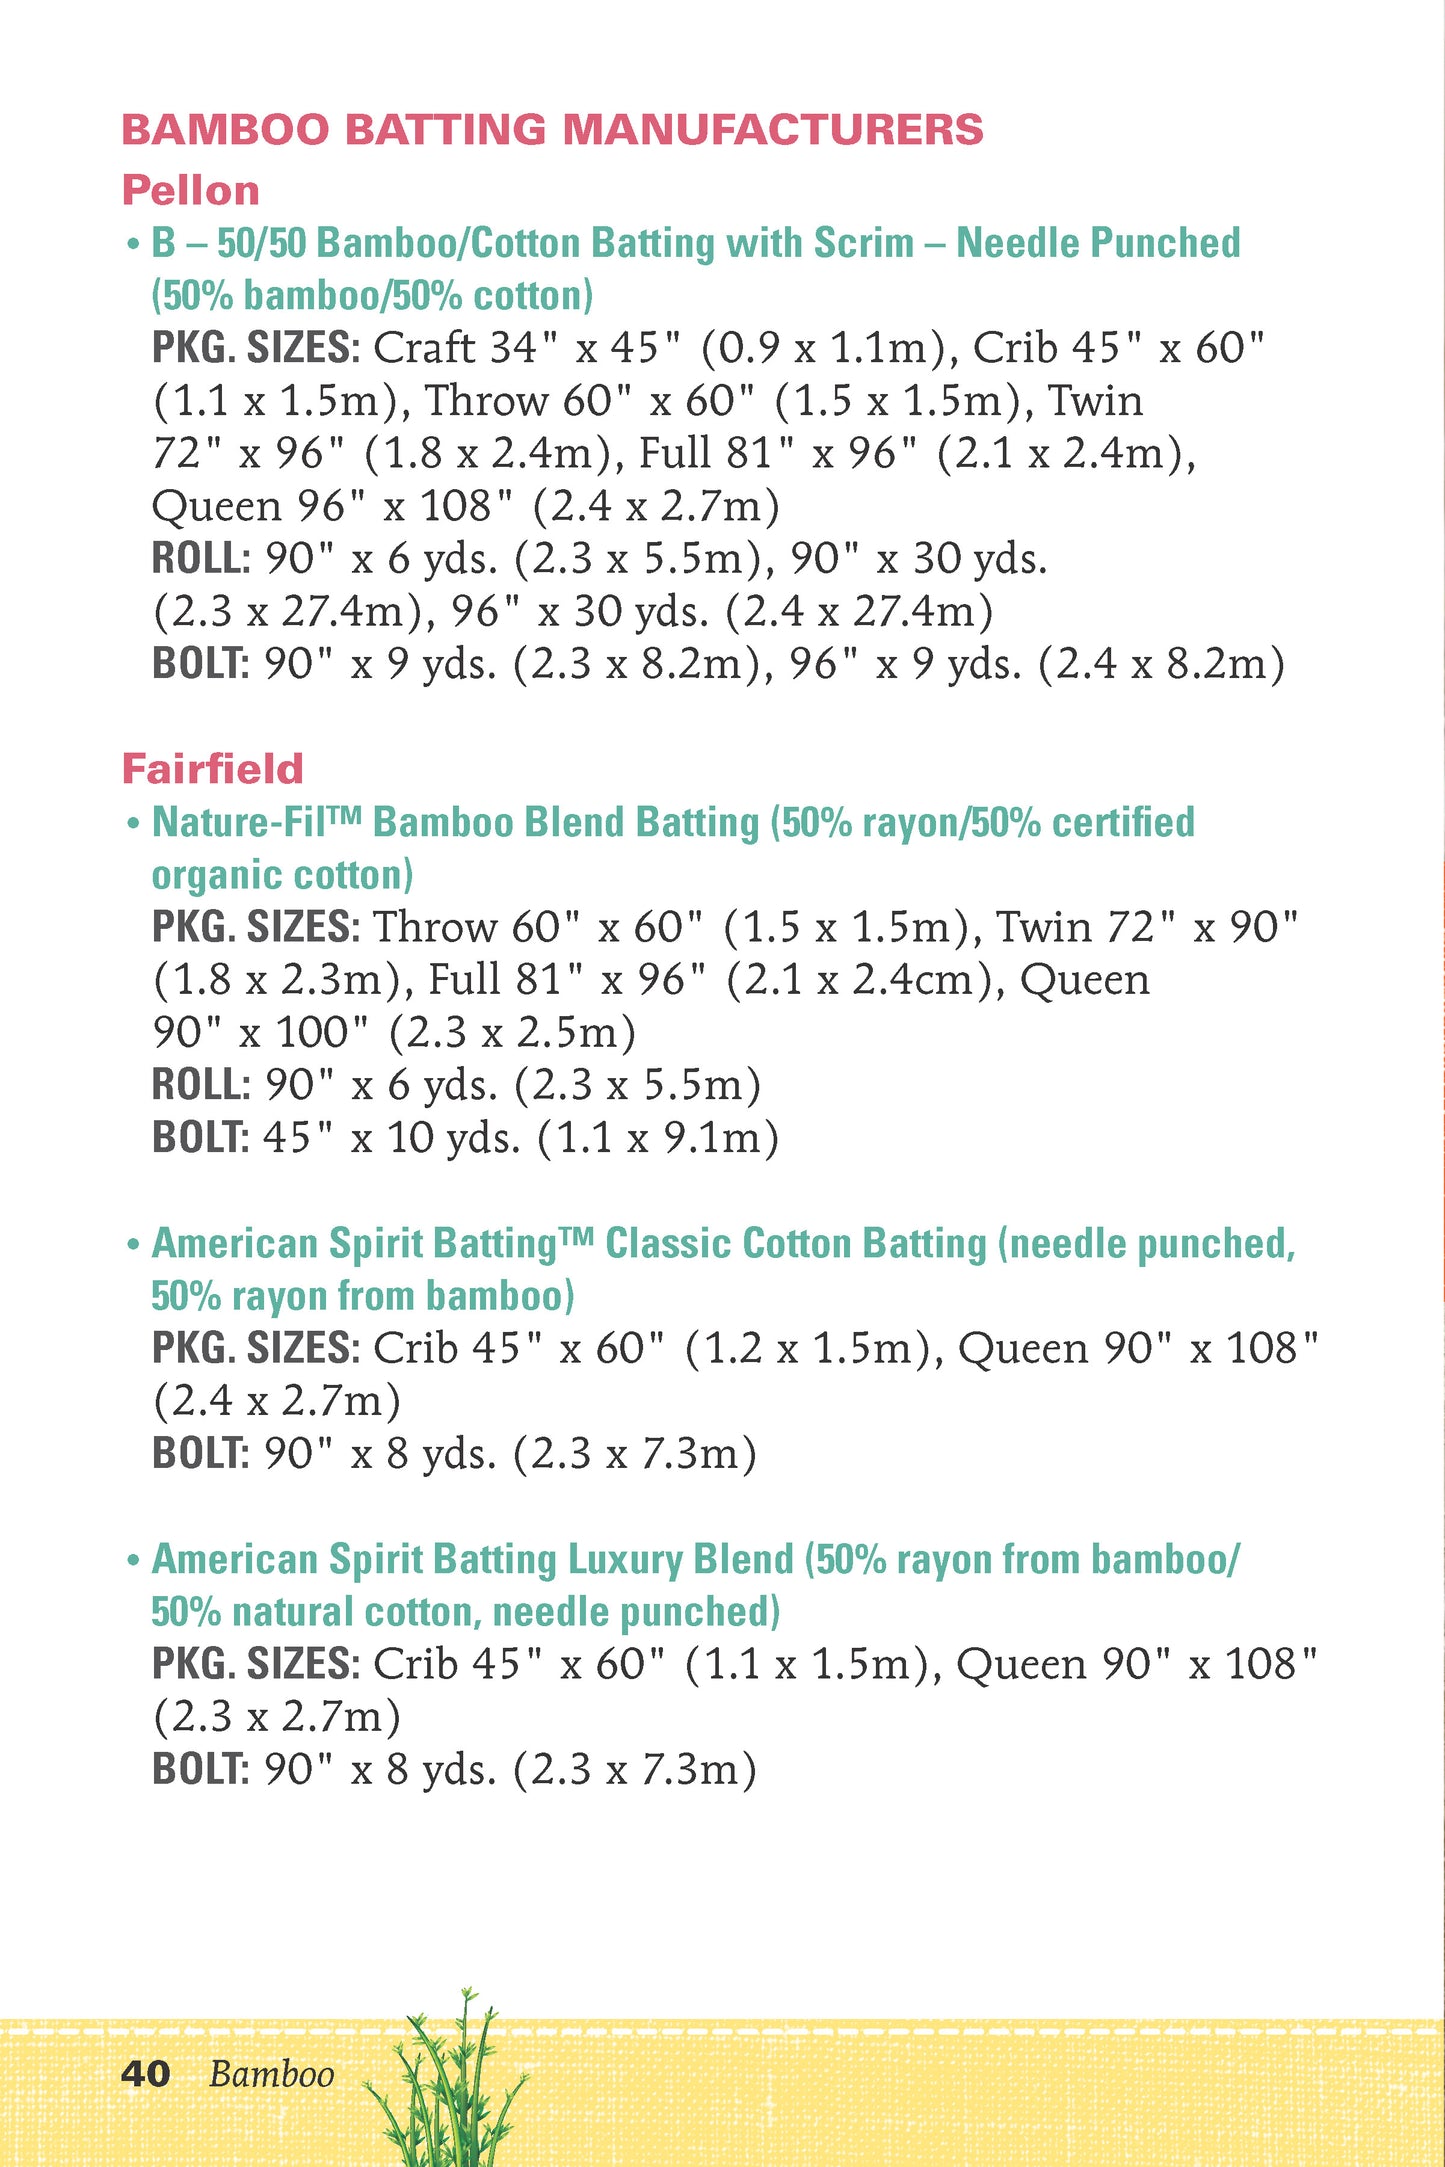 Know Your Battings